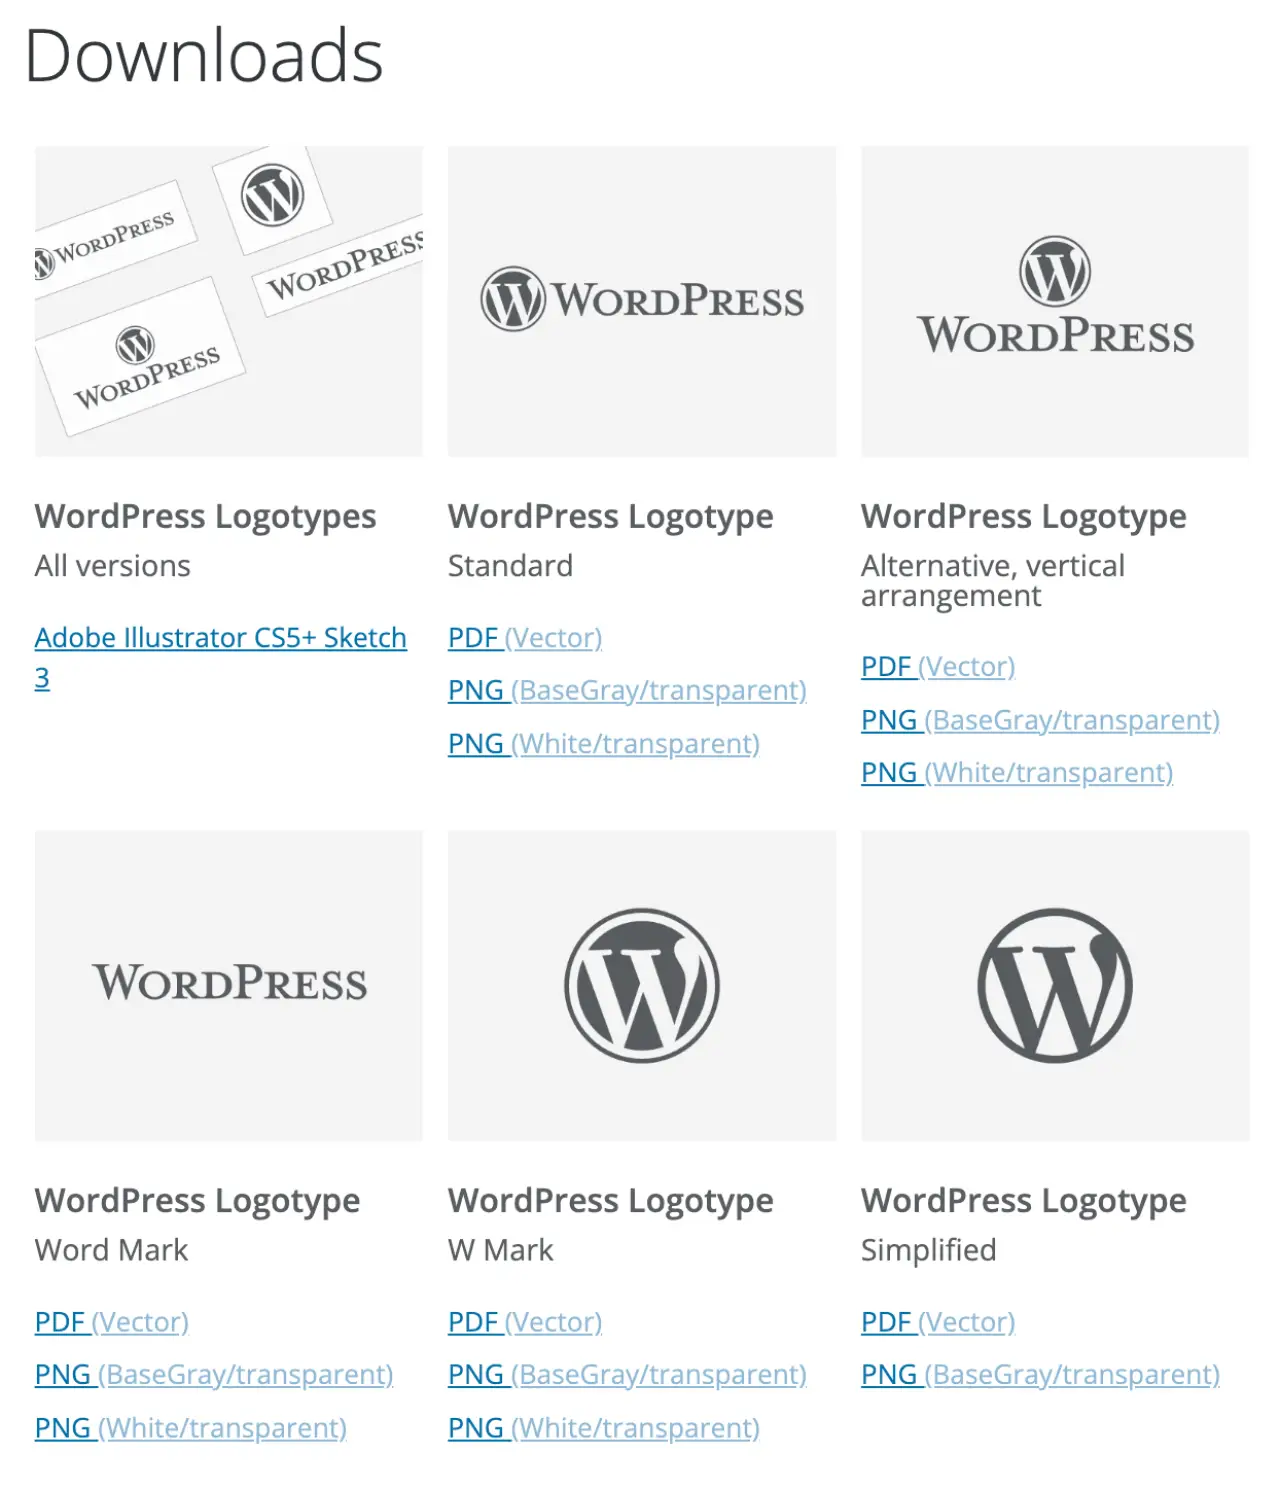 Download the official WordPress logos from here